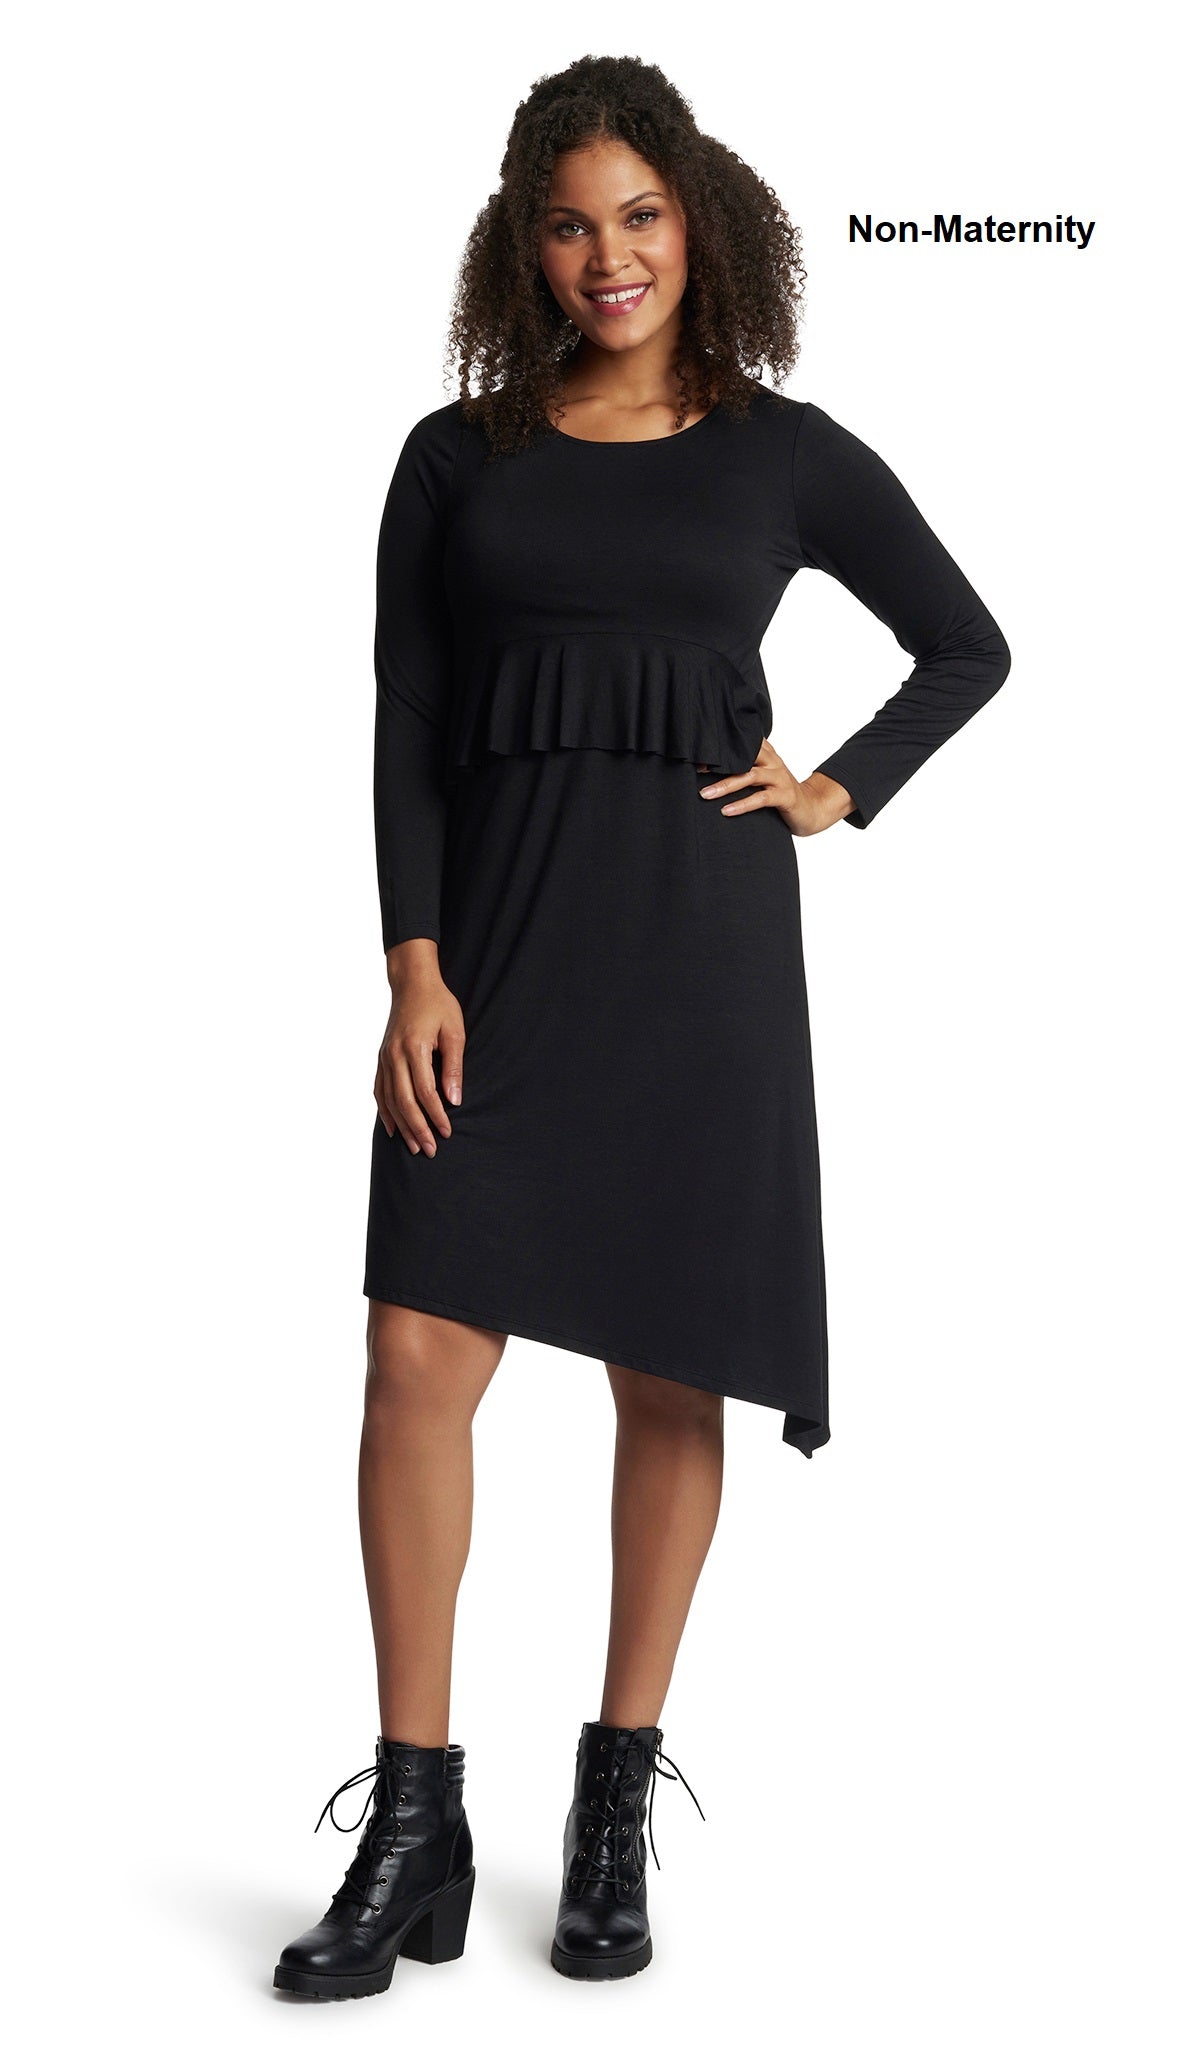 Black Melissa dress worn by woman as non-maternity style with one hand on her hip.